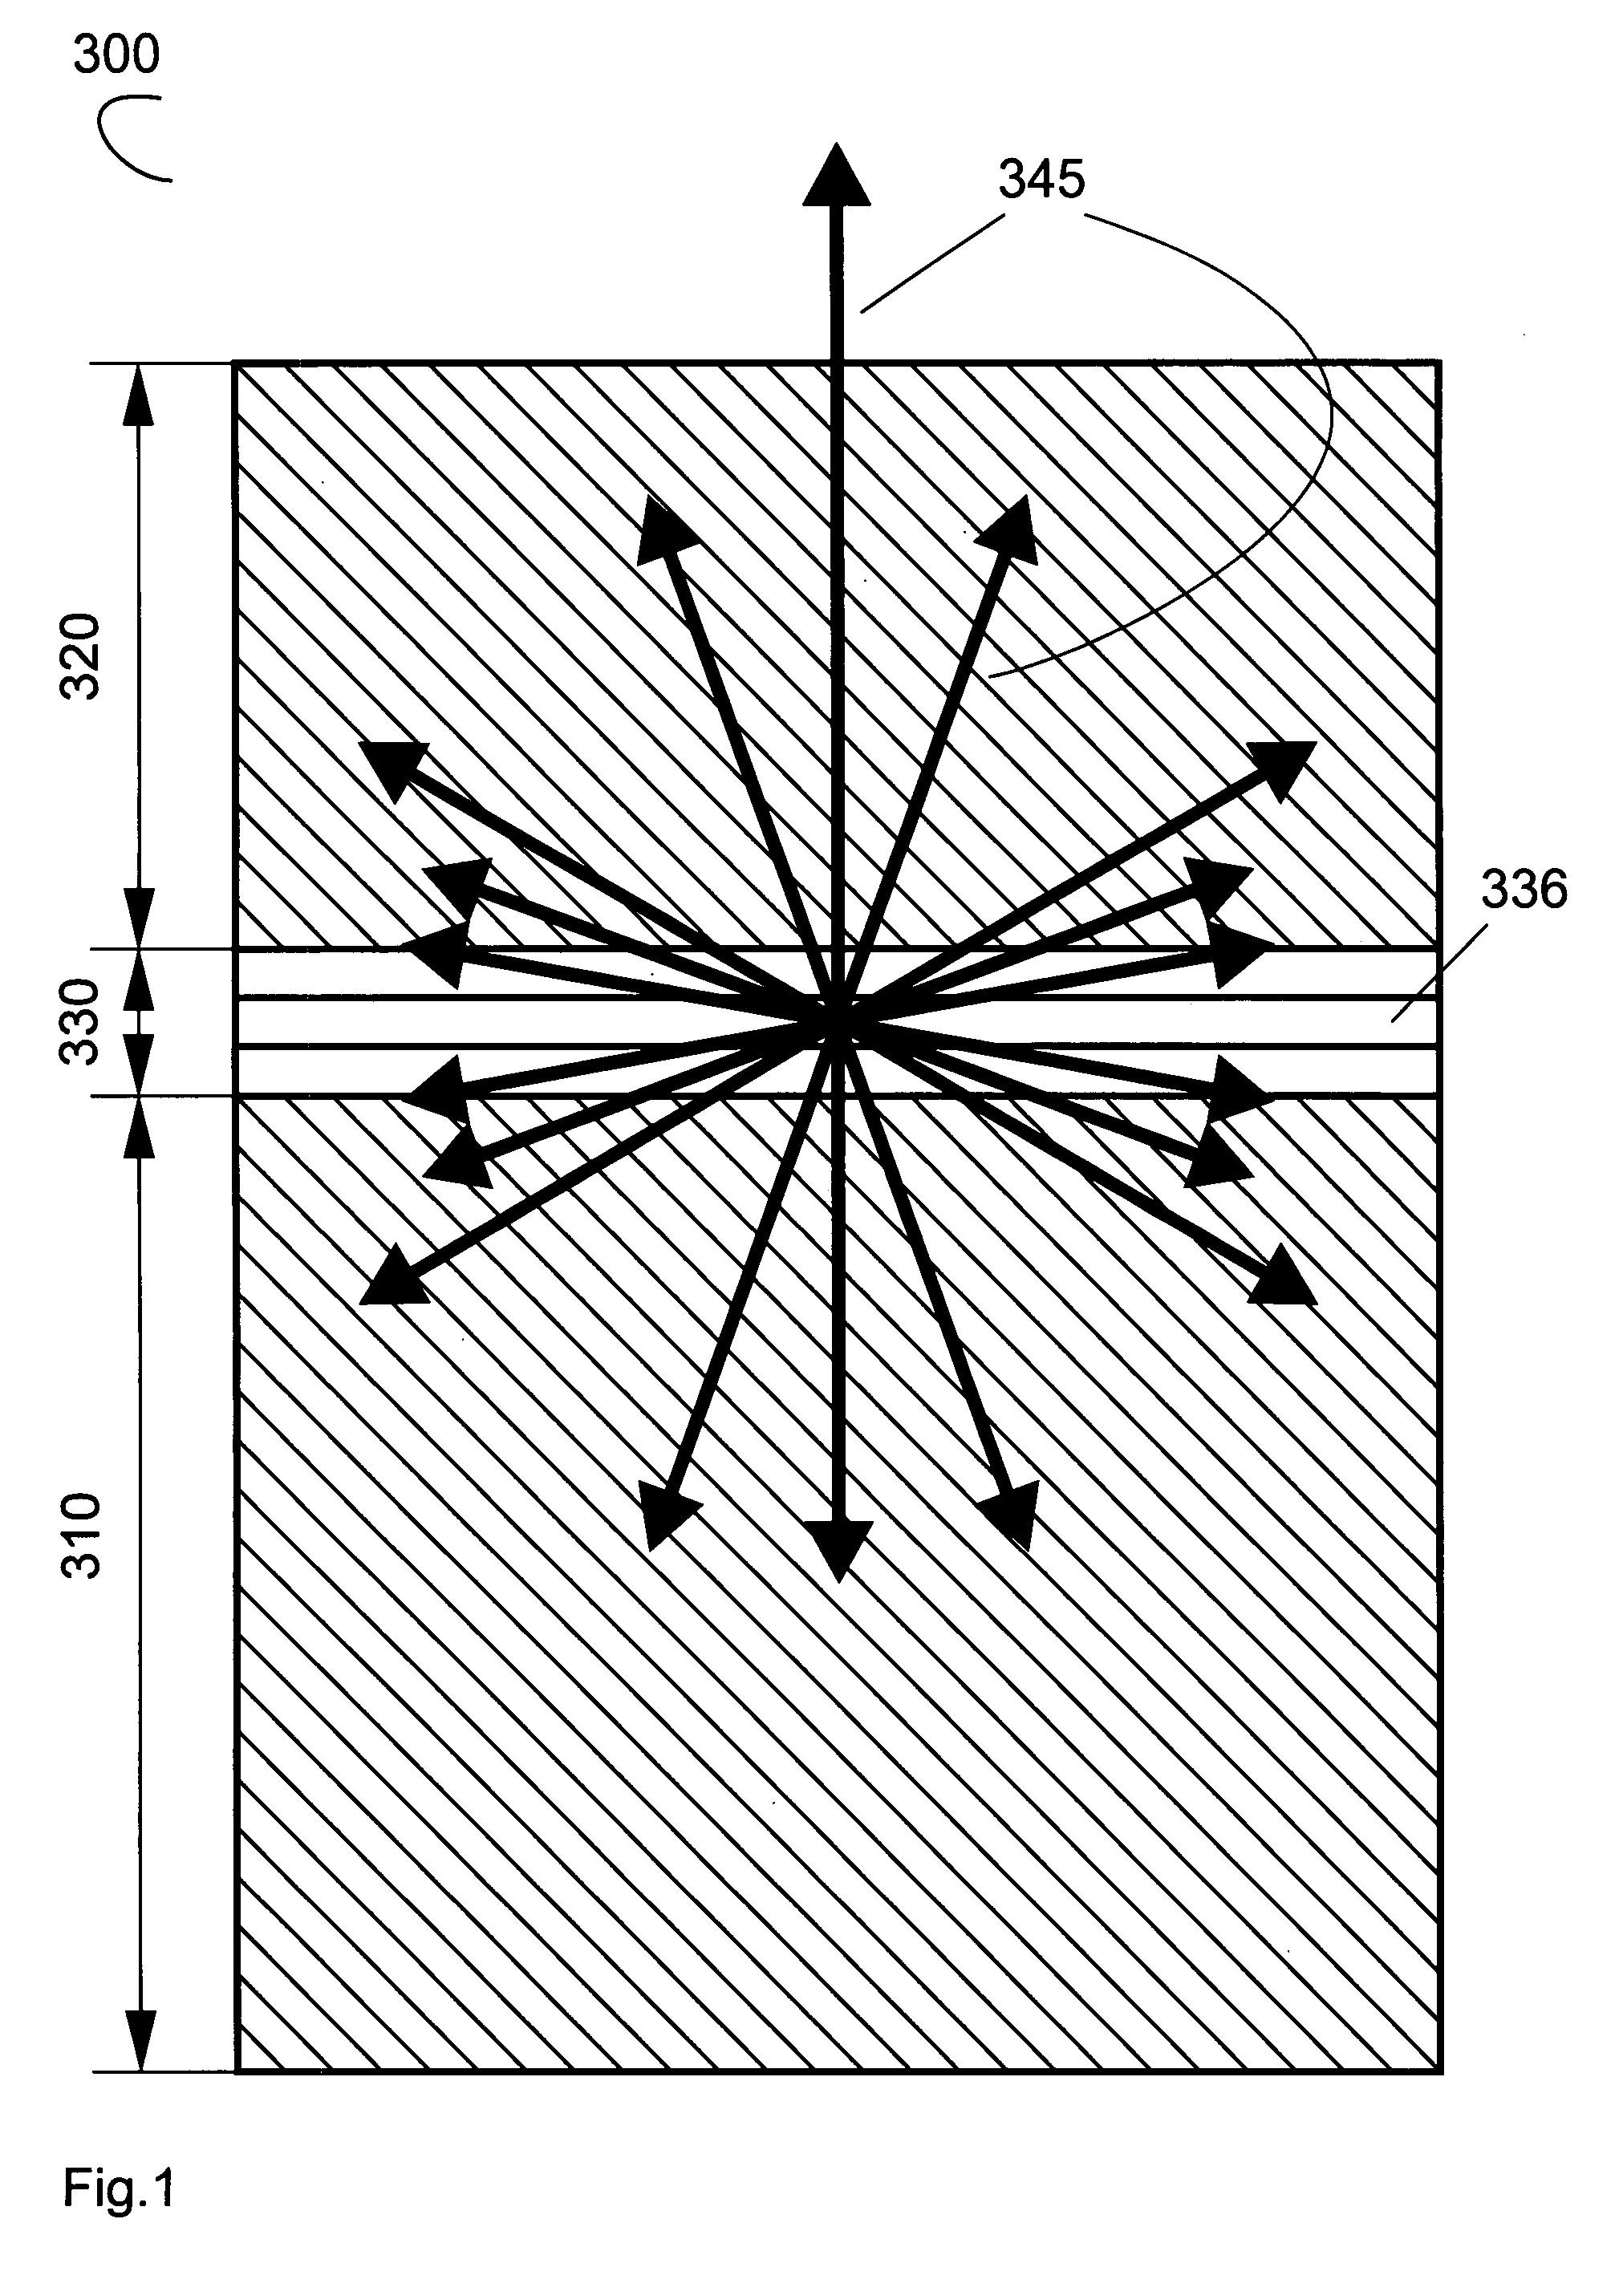 Resonant cavity optoelectronic device with suppressed parasitic modes